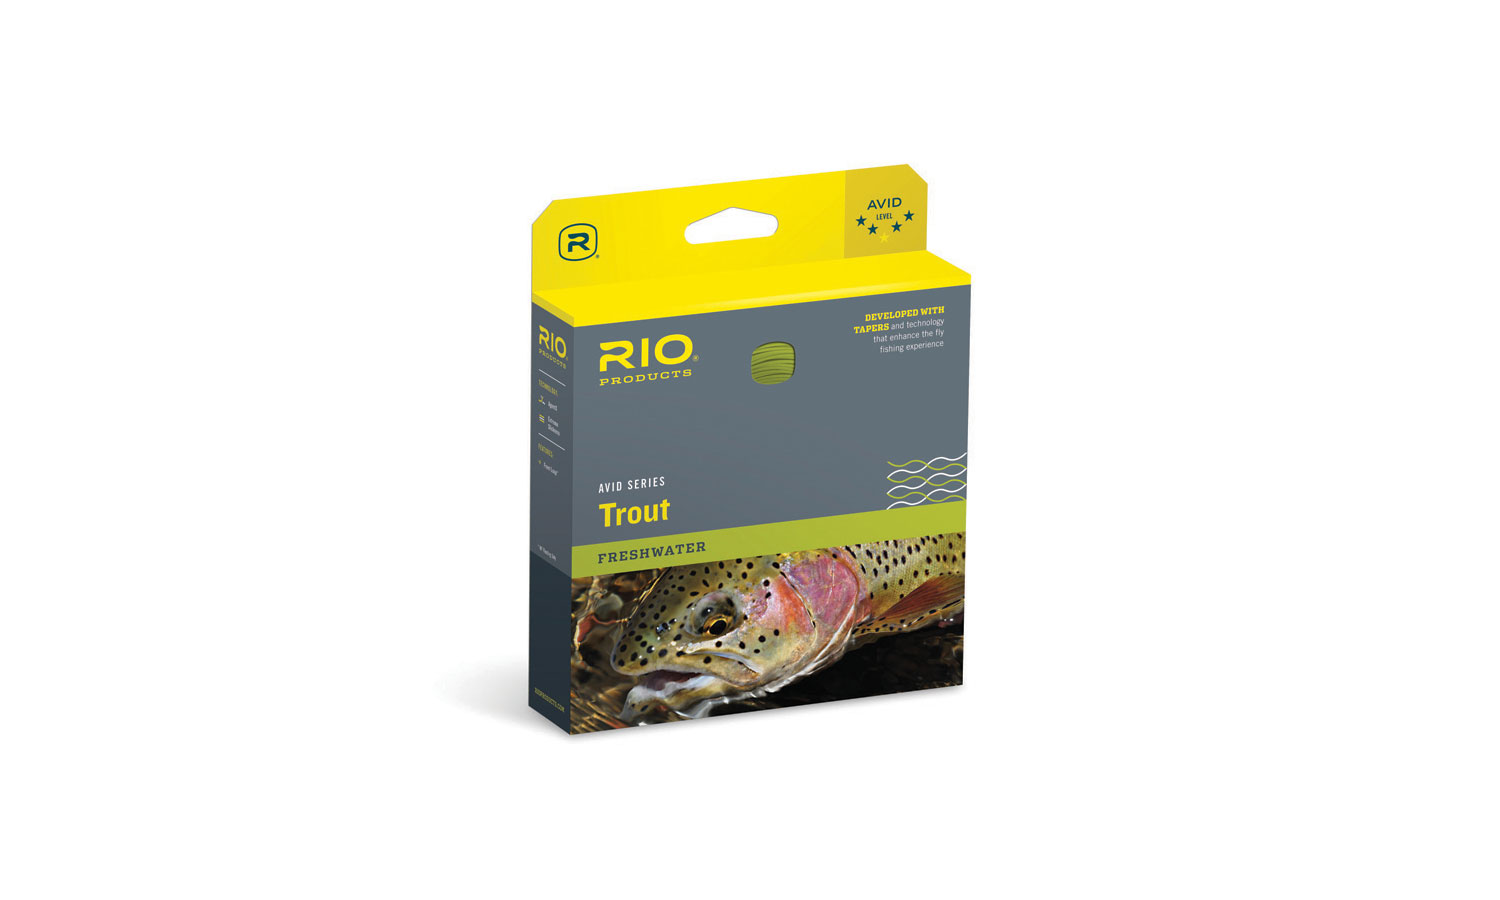 https://www.alaskaflyfishinggoods.com/wp-content/uploads/product_images/Rio/Line_Boxes/Rio_Avid_Trout_box.jpg